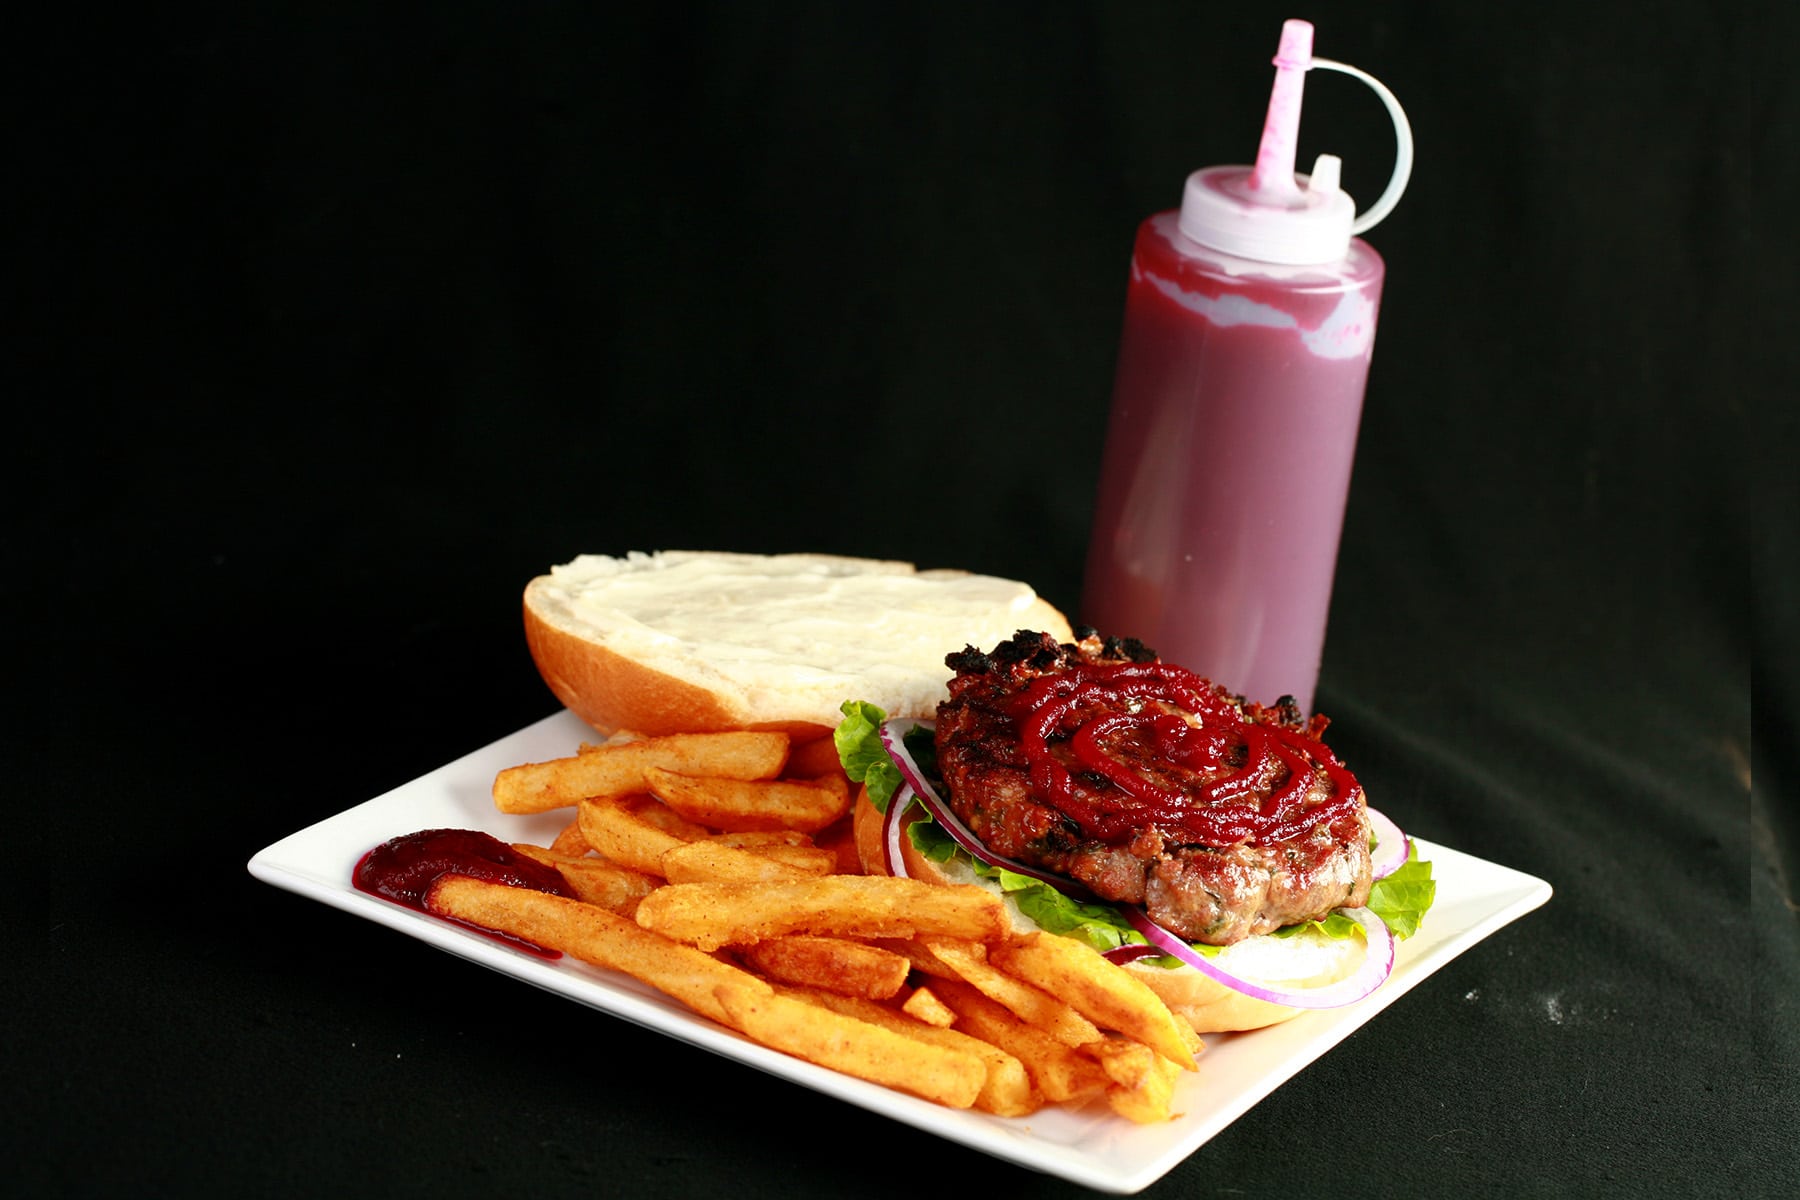 An open faced burger on a plate with fries. The burger has a large ruby red swirl of beet ketchup on it, and there's a bottle of the same, behind the plate.